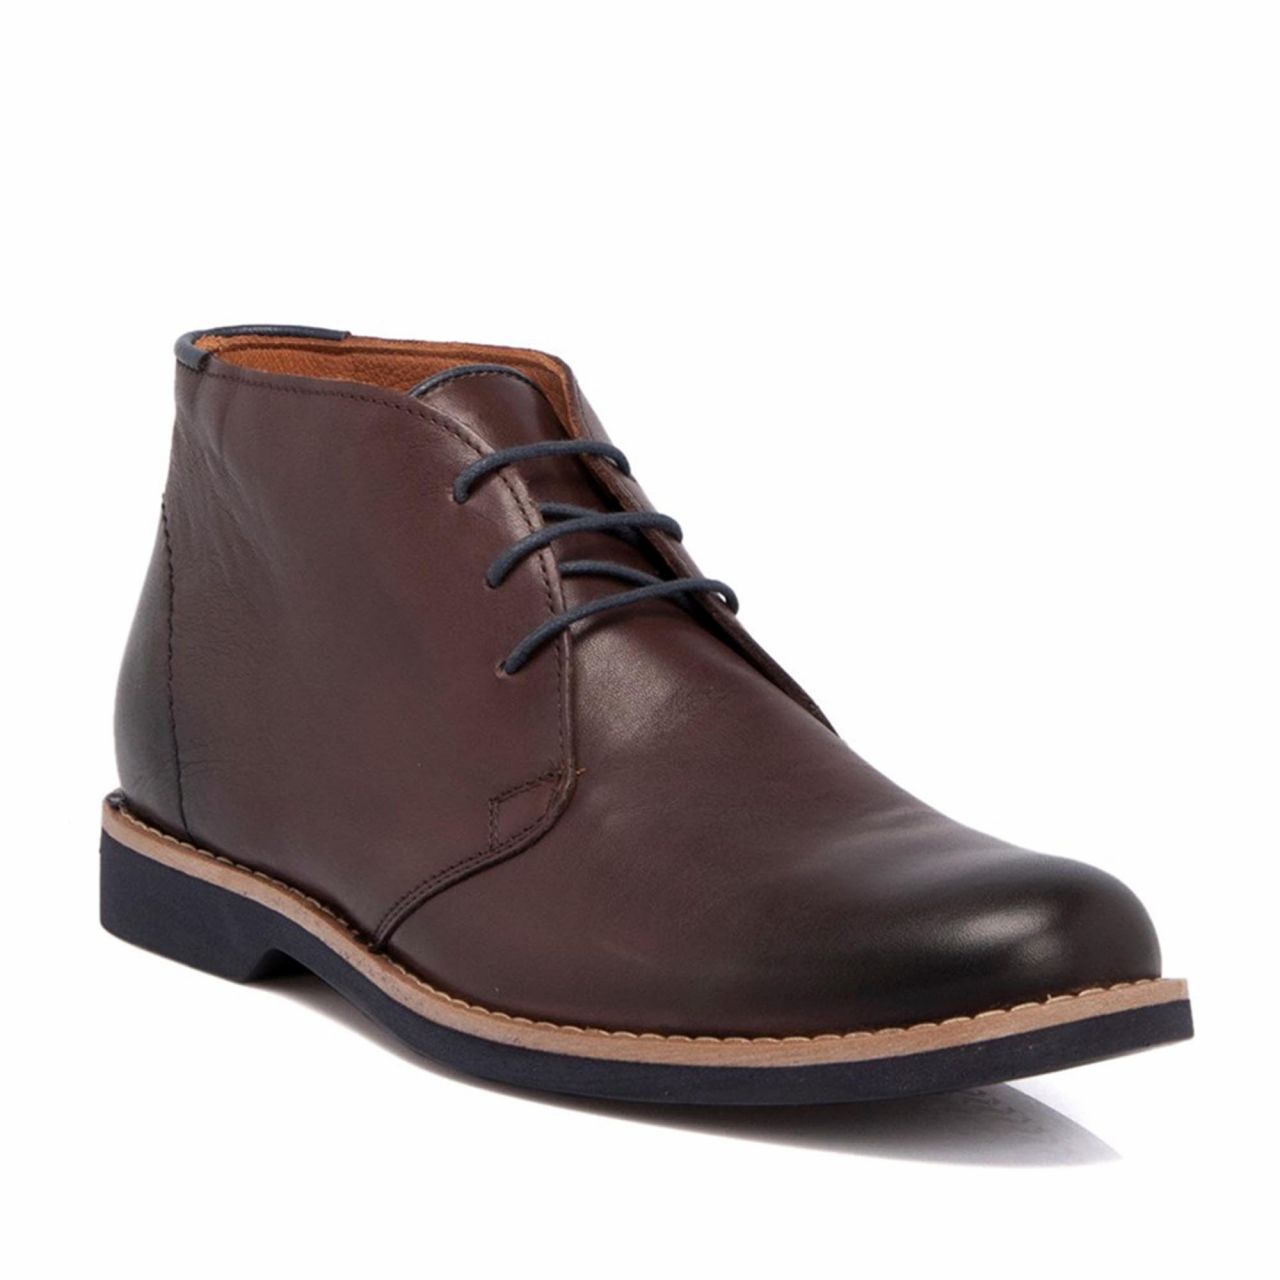 Classic Men's Ankle Boot